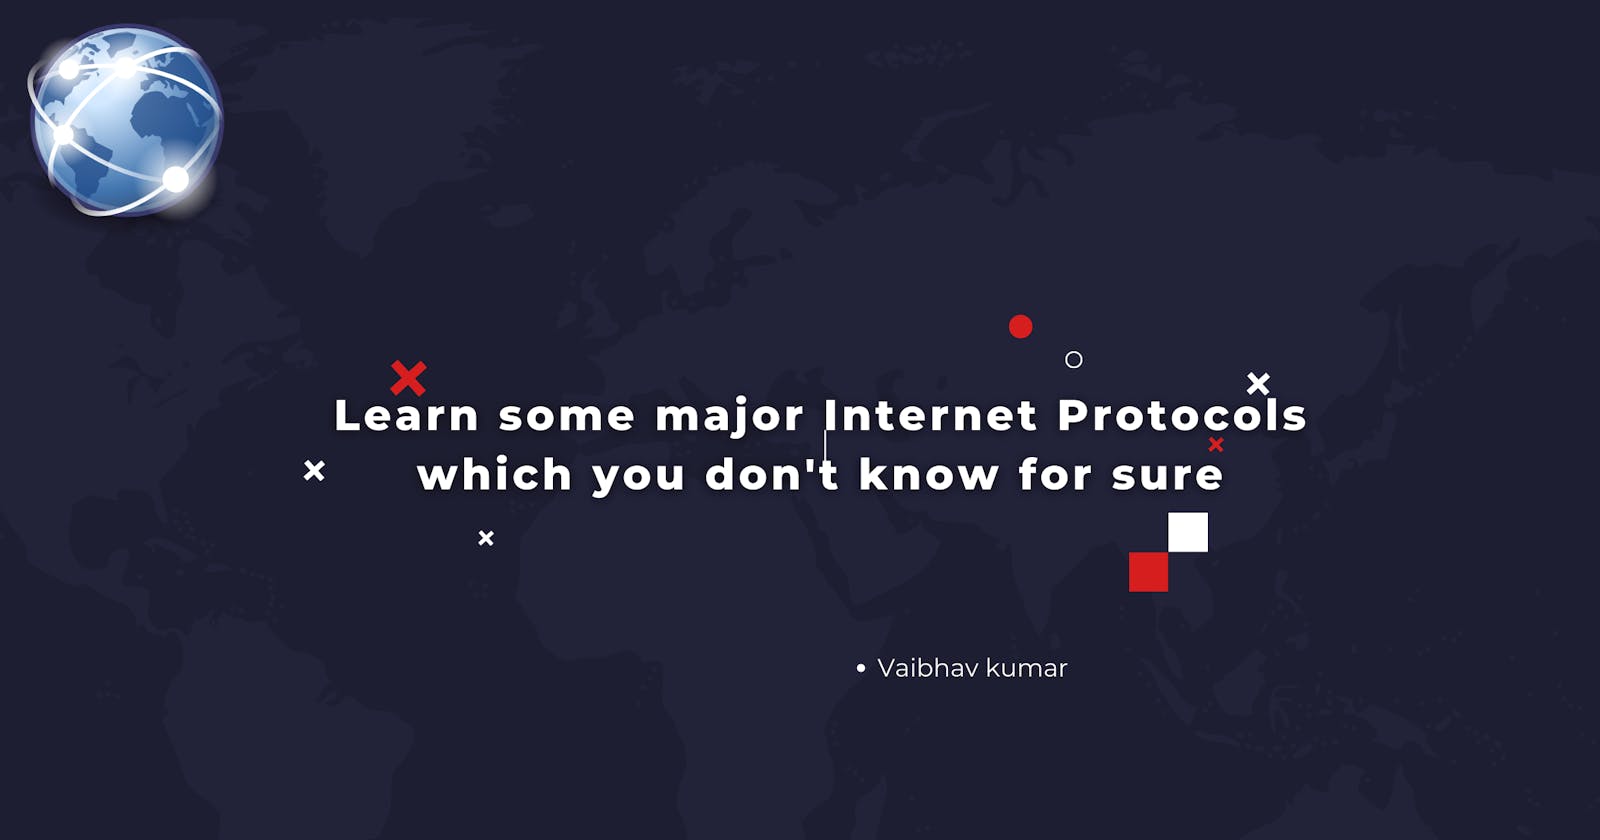 Learn some major Internet Protocols which you don't know for sure